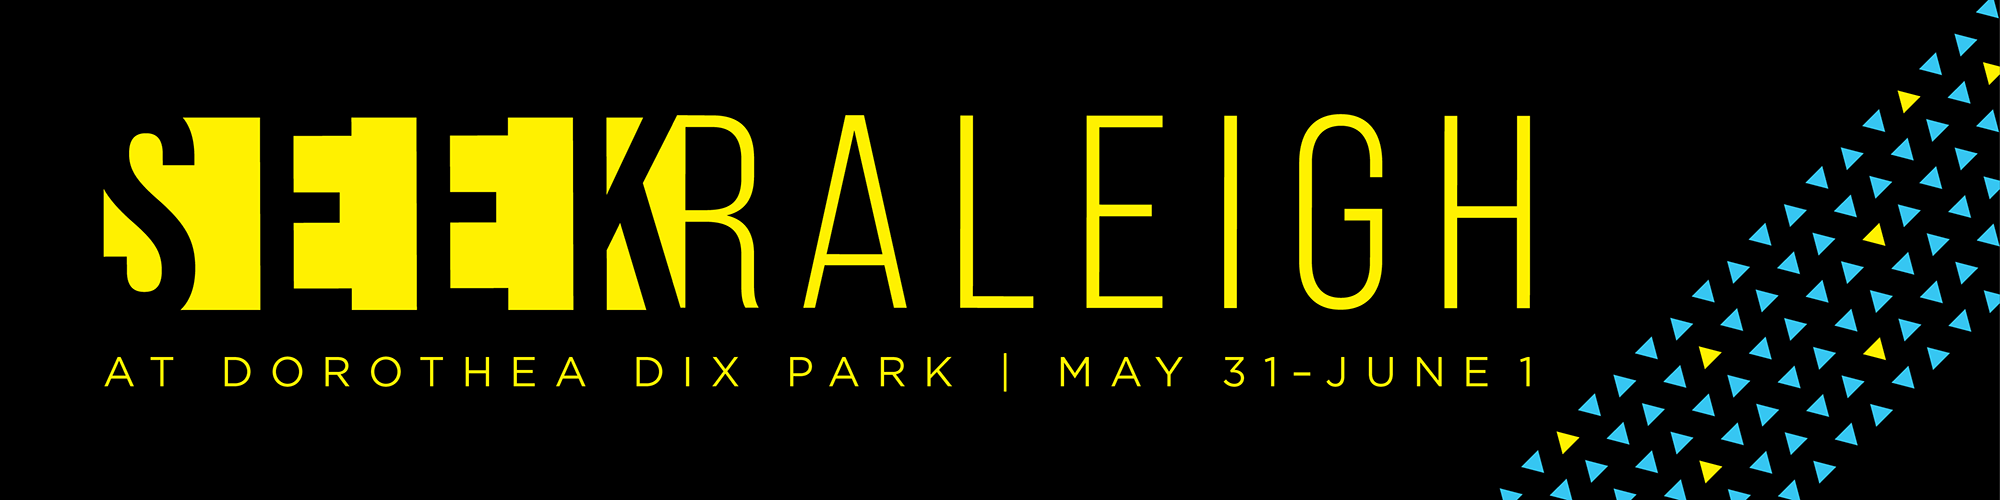 SEEK Raleigh graphic for Dorothea Dix Park with dates May 31 and June 1